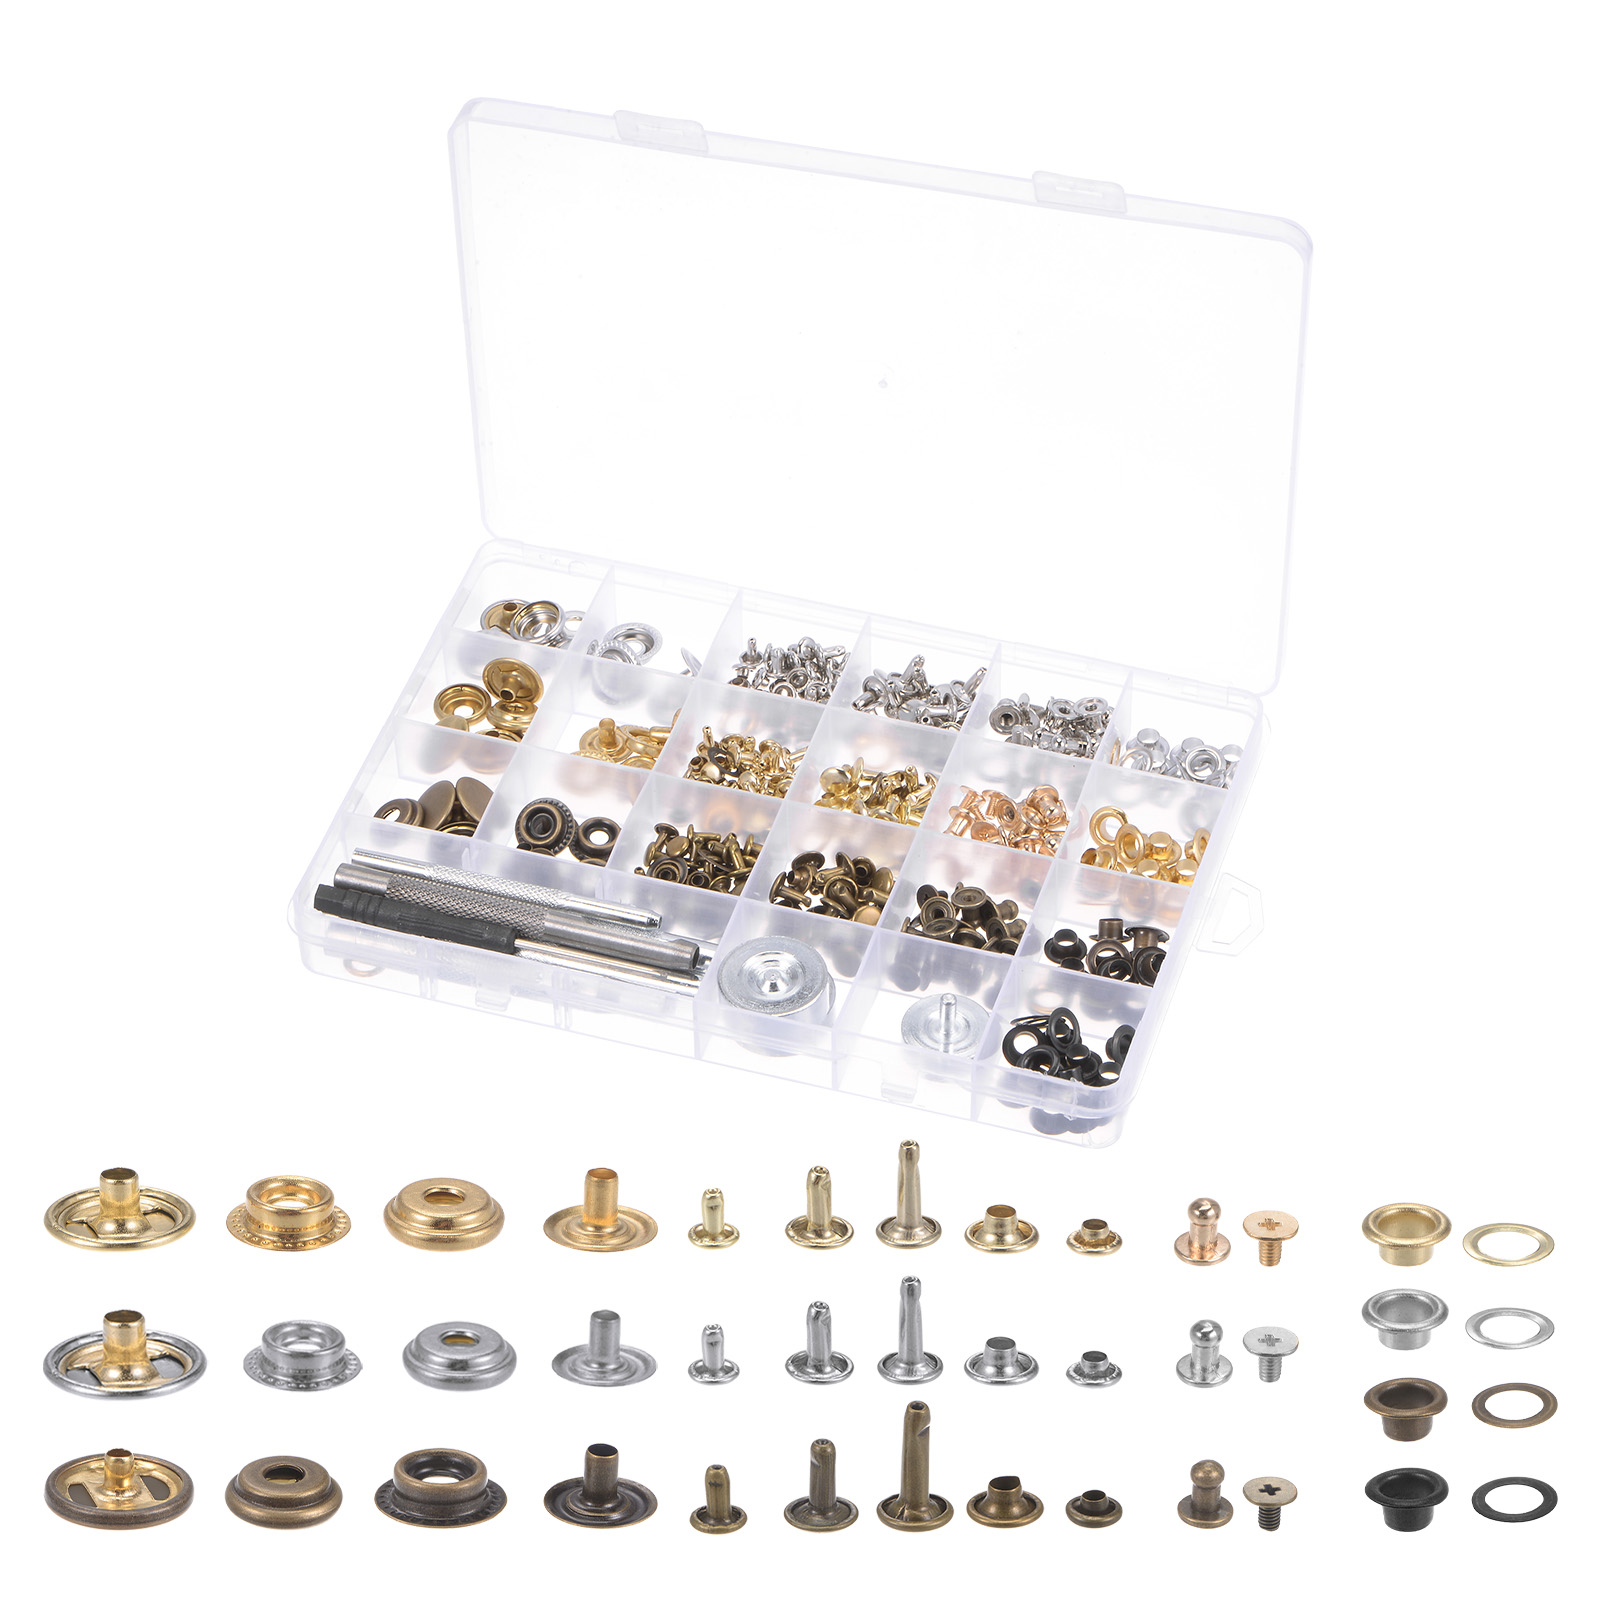 Unique Bargains Snap Fasteners Kit & Leather Rivets &  Grommets Eyelets with 9 Setter Tools